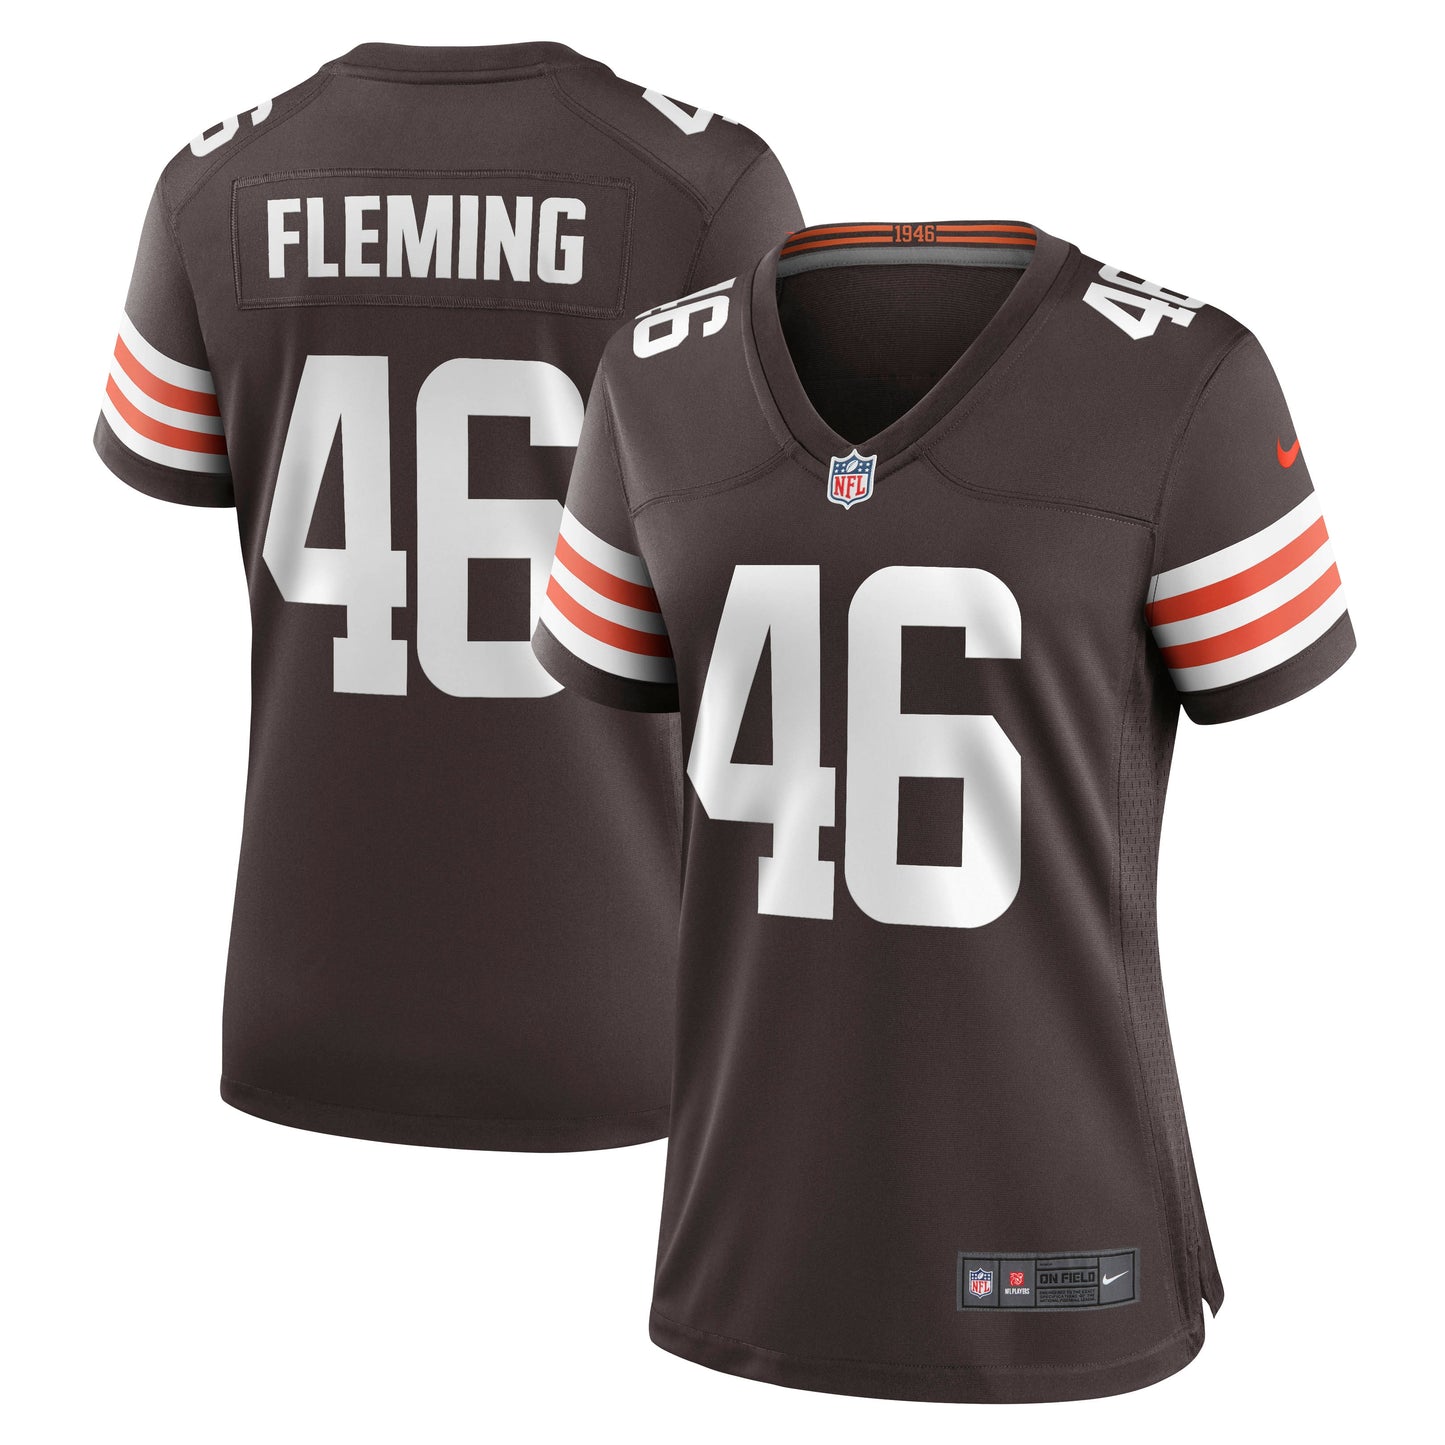 Don Fleming Cleveland Browns Nike Women's Retired Player Jersey - Brown